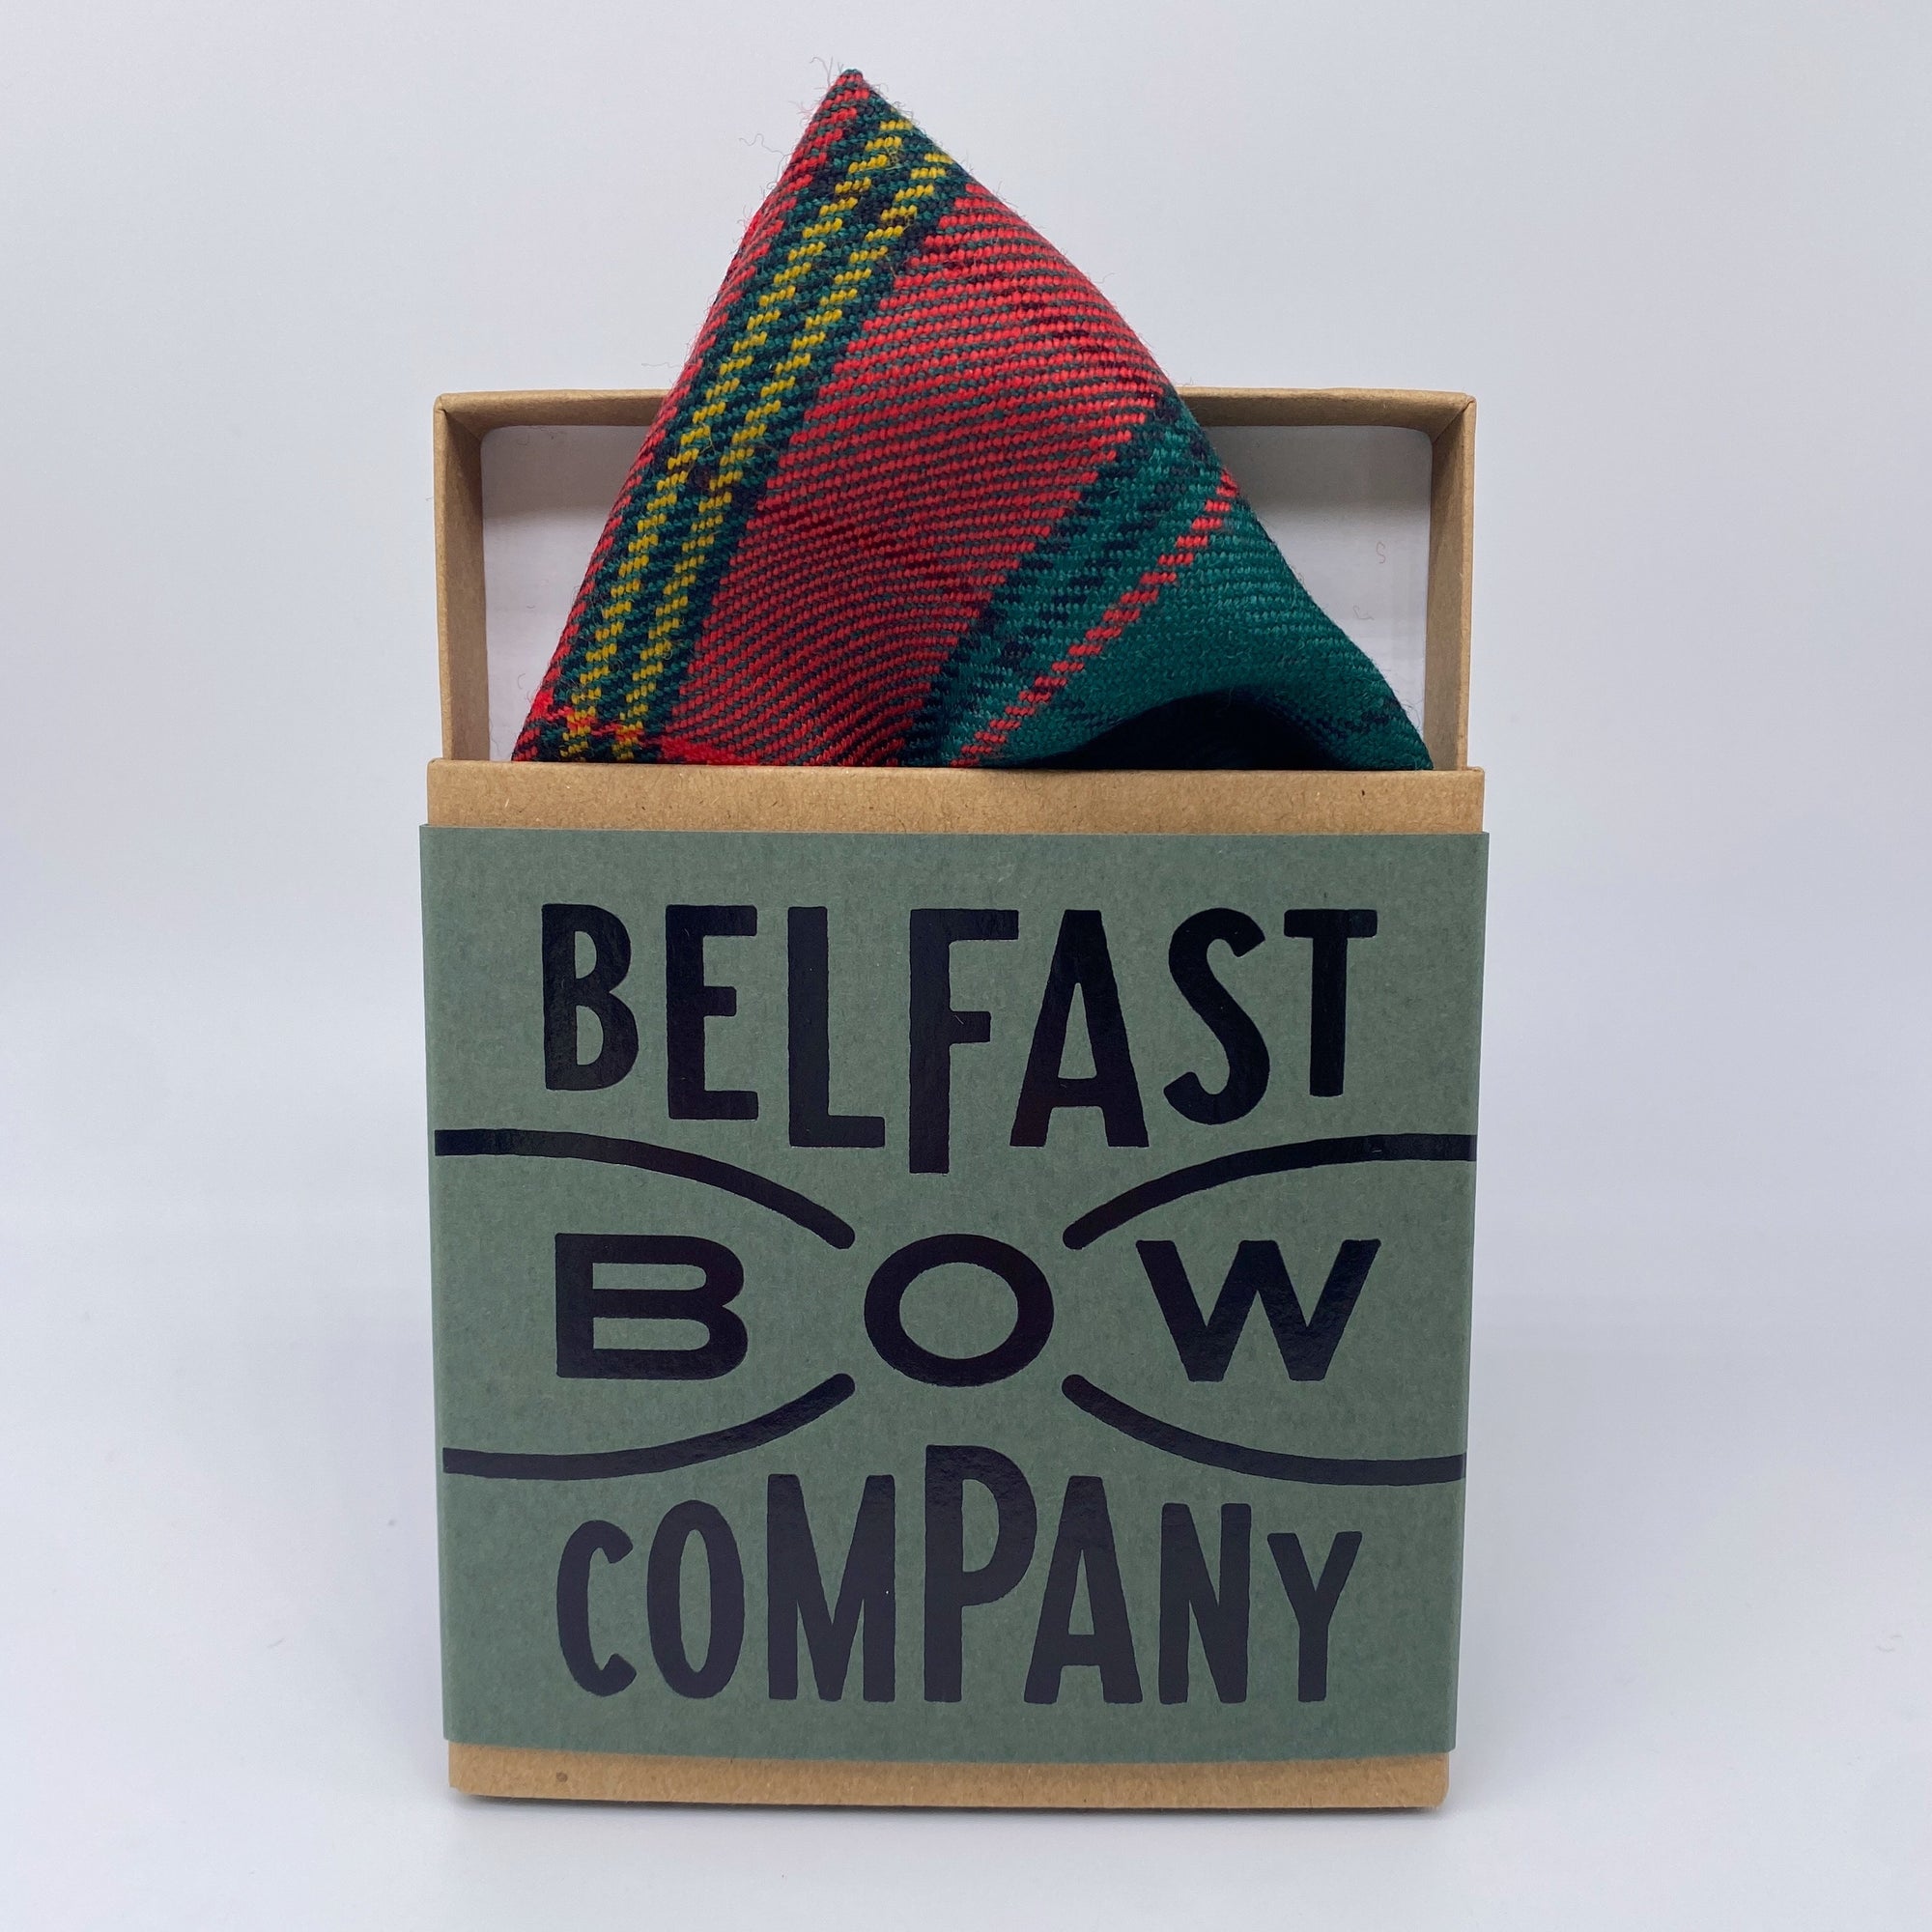 Ulster Tartan Pocket Square by the Belfast Bow Company